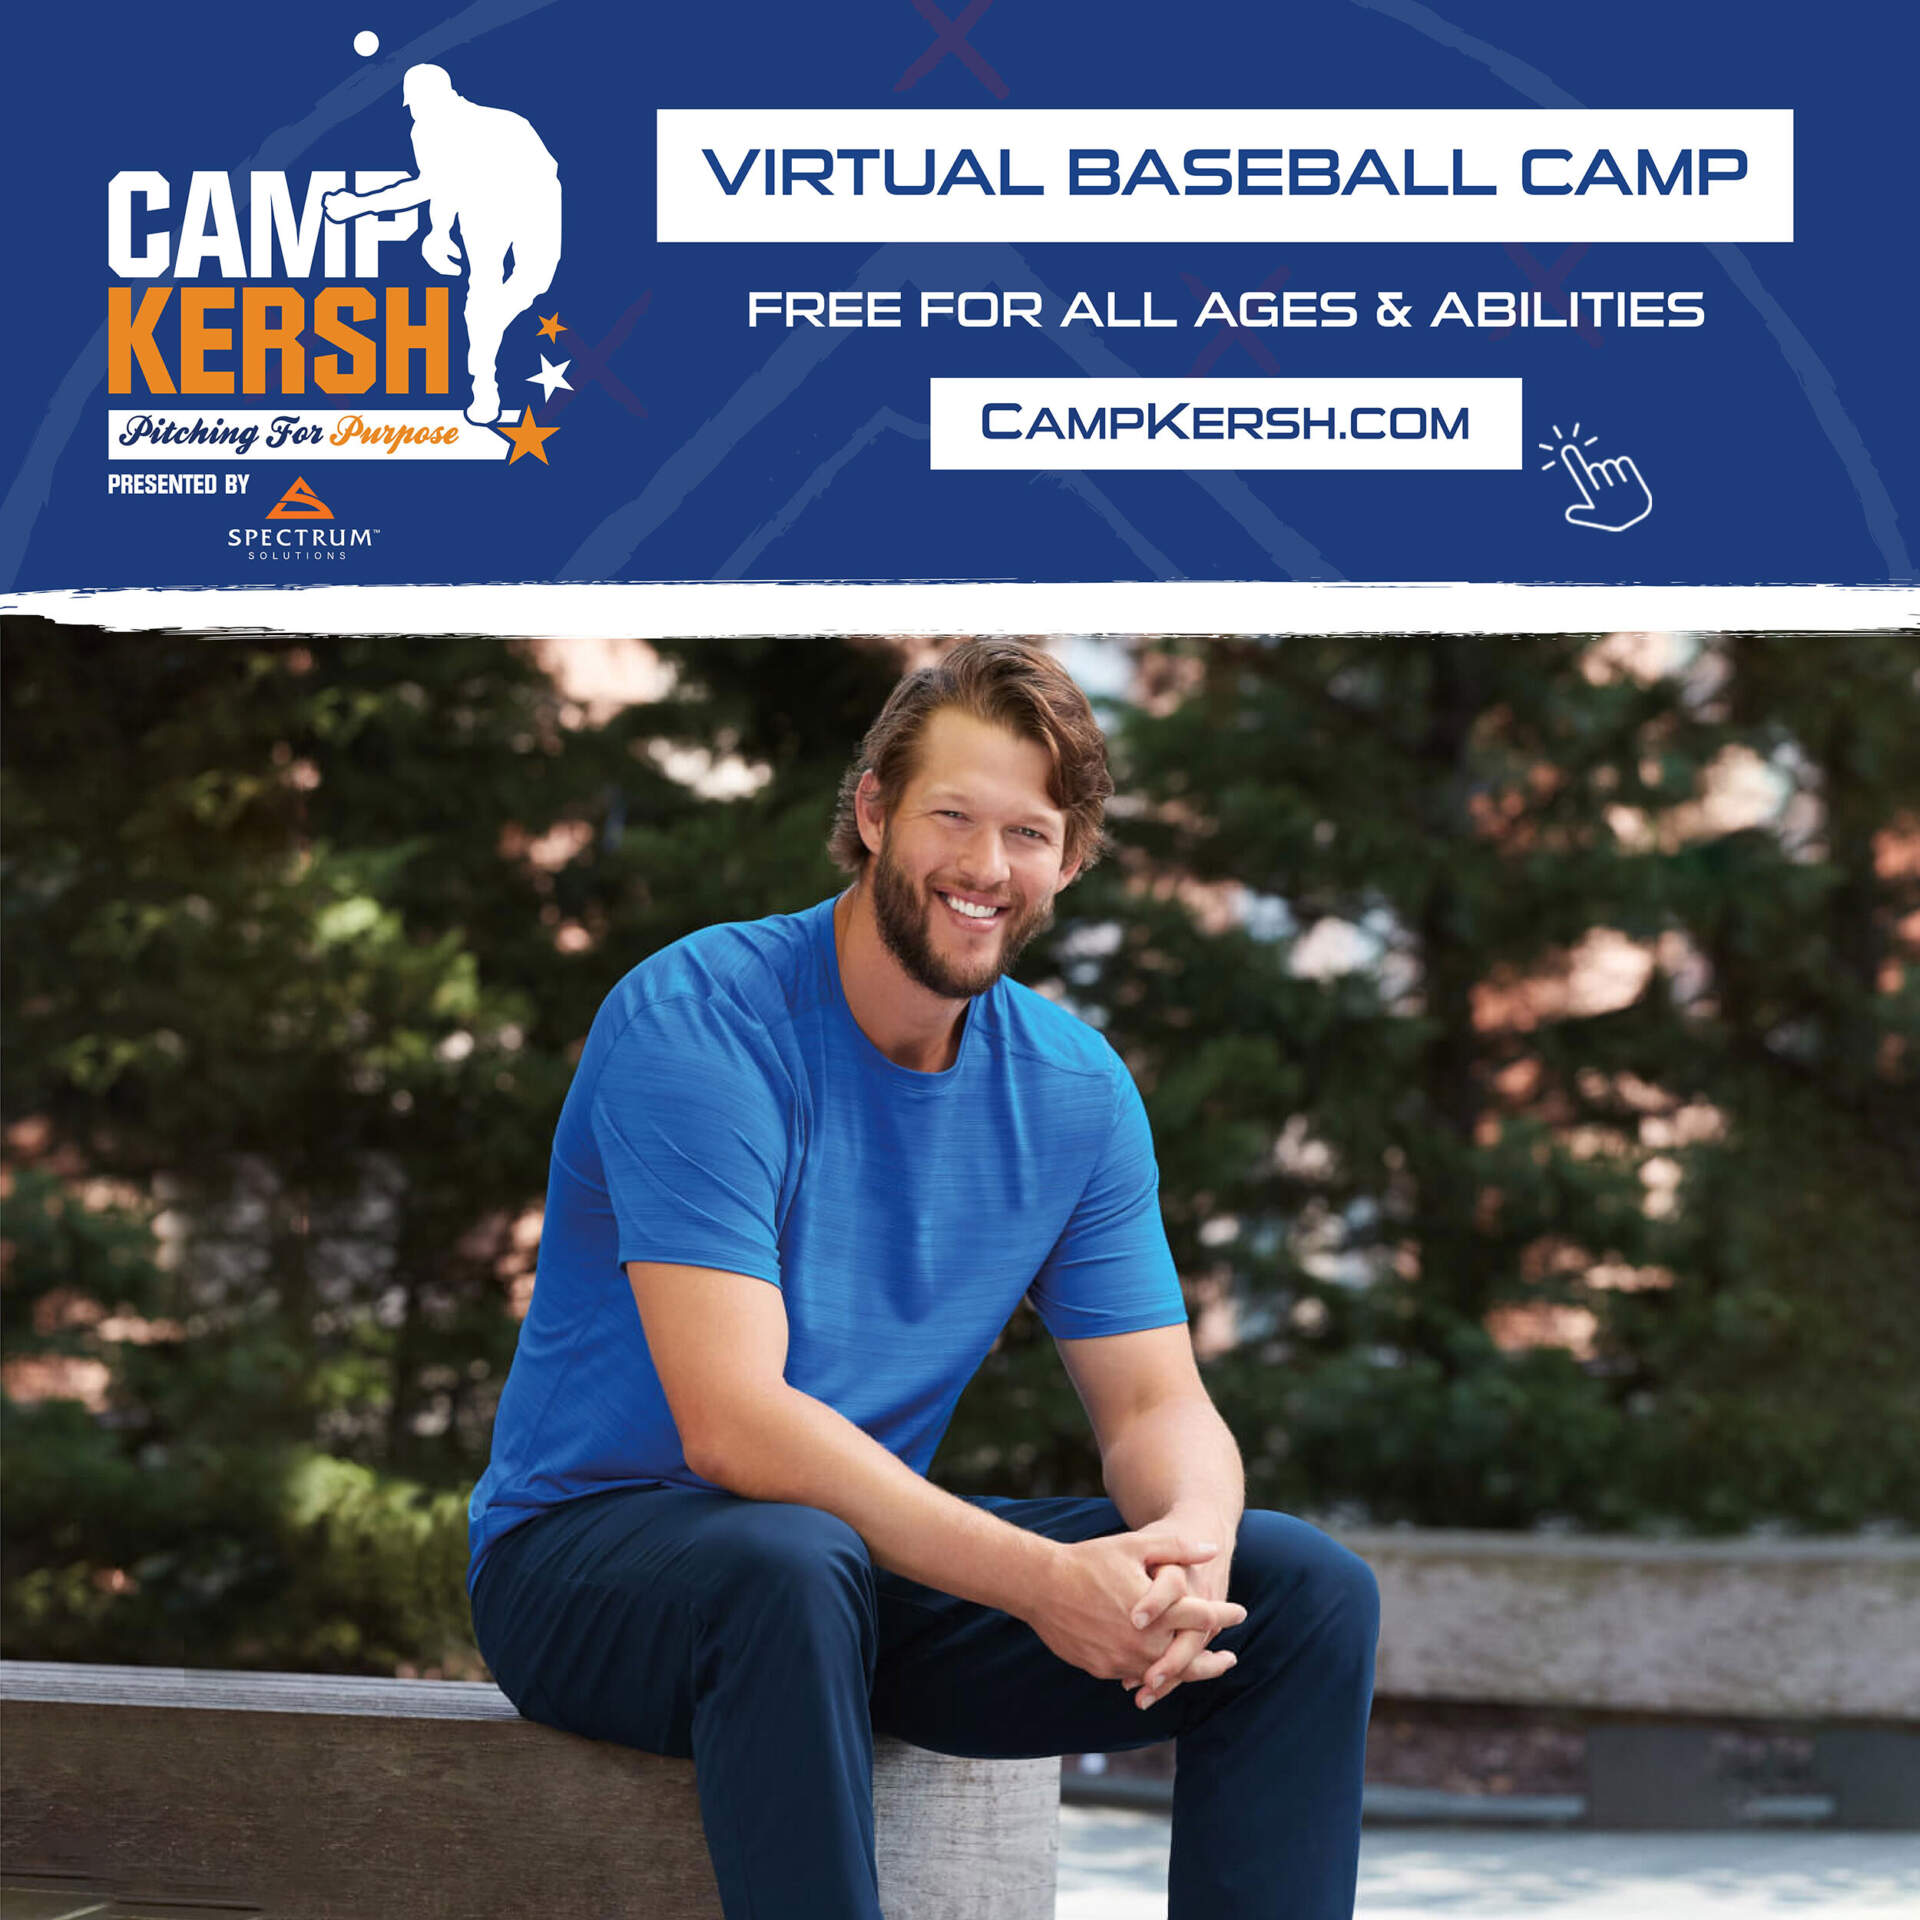 Camp Kersh Baseball Event Free for all kids